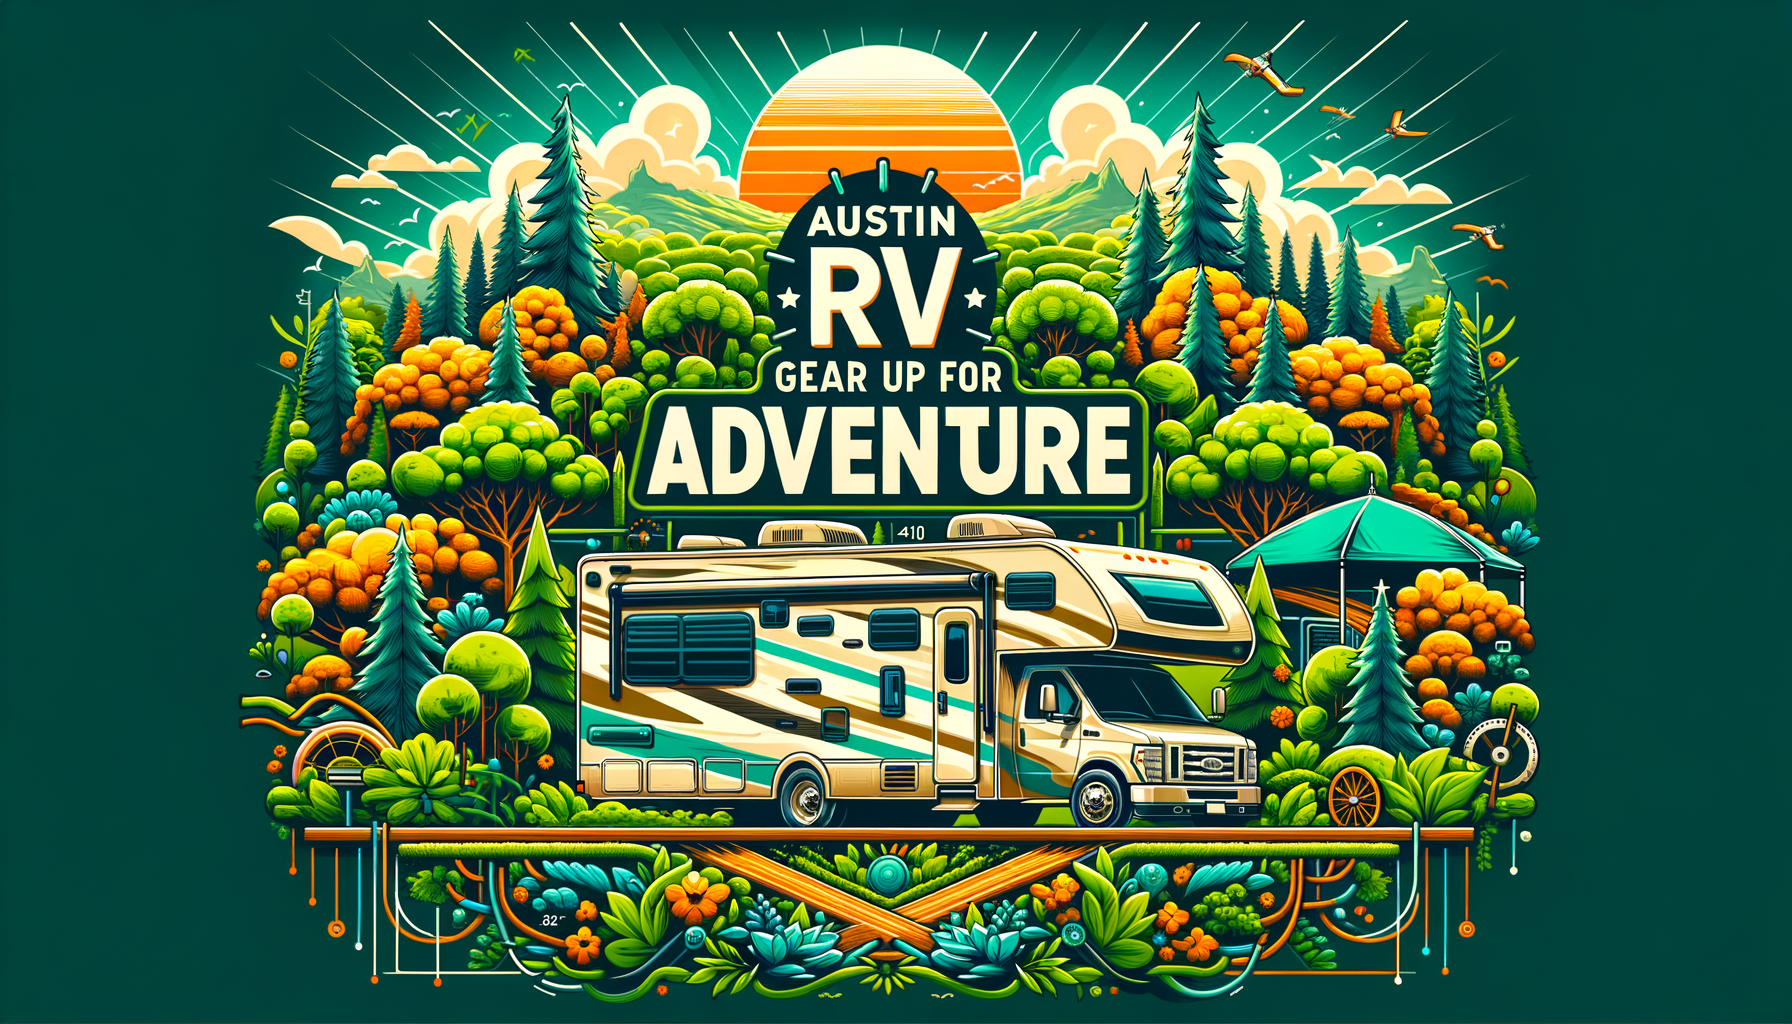 discover the latest models and gear at the austin rv expo and get ready for an adventure of a lifetime. explore top brands and find everything you need for your next outdoor escapade!